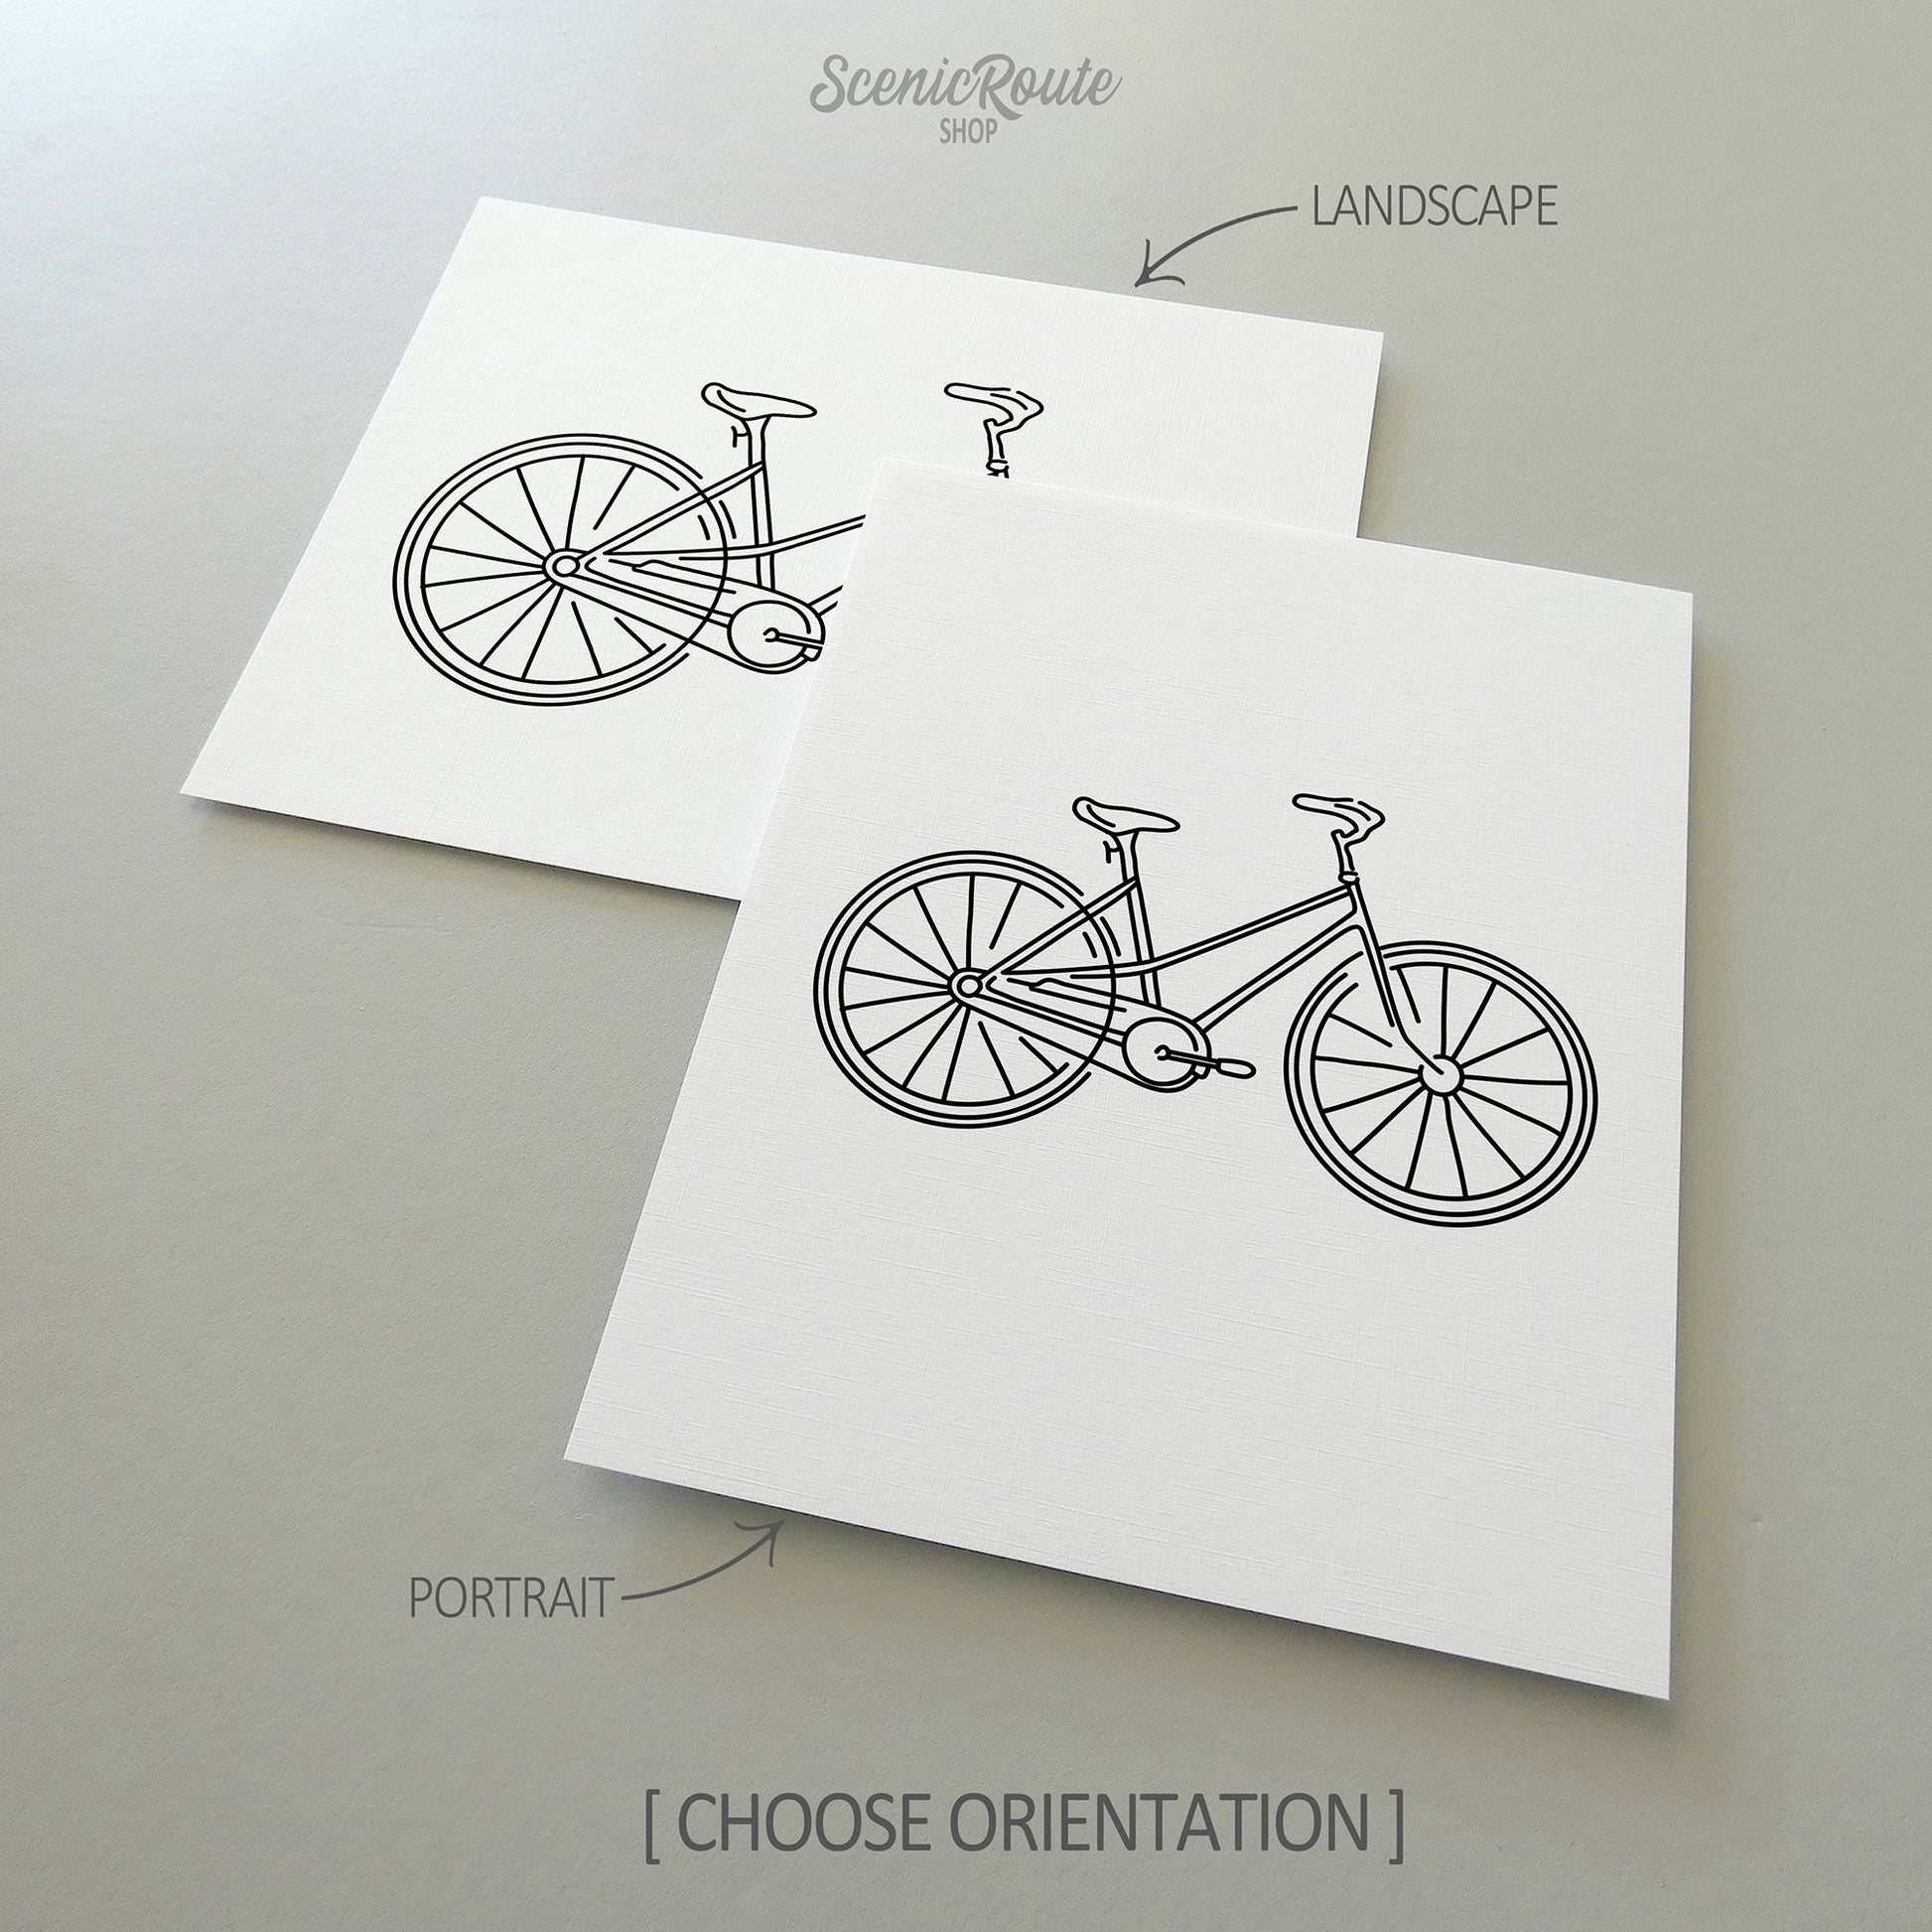 Two line art drawings of a Bicycle on white linen paper with a gray background.  The pieces are shown in portrait and landscape orientation for the available art print options.